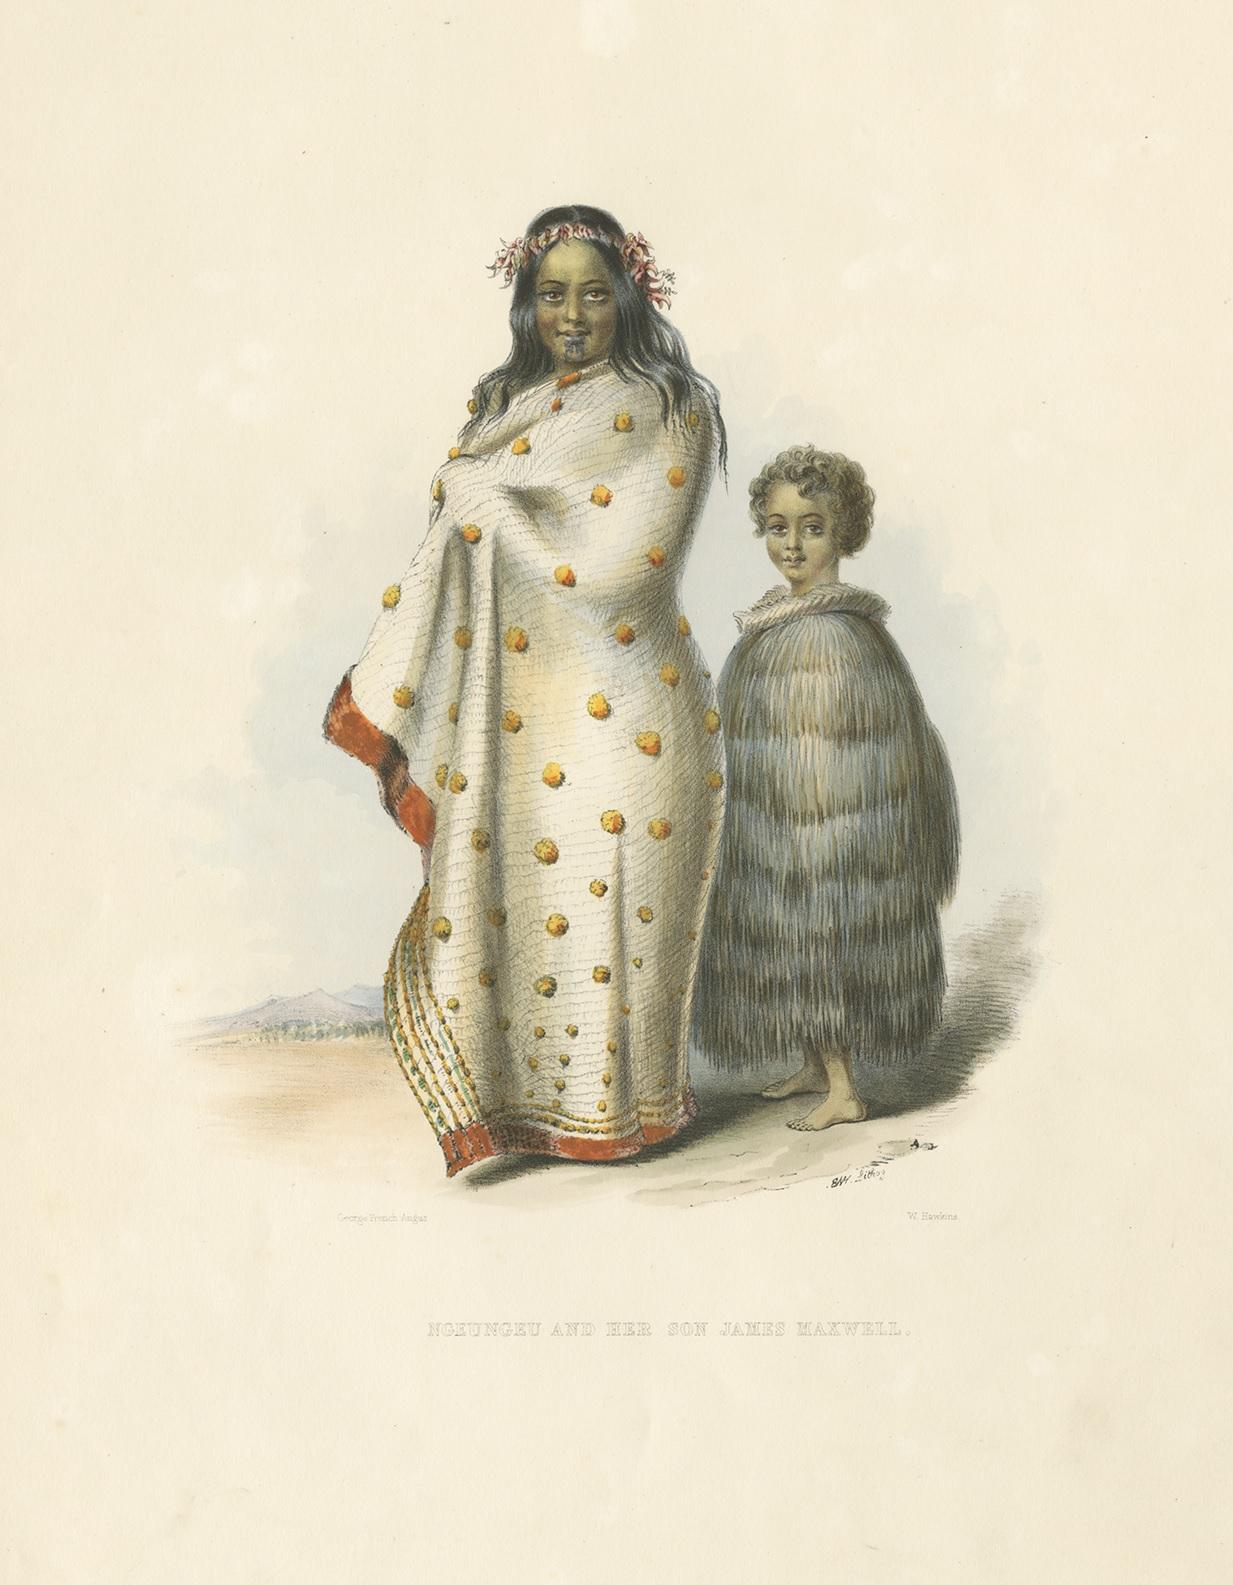 Antique print titled 'Ngeungeu and her son James Maxwell'. Lithograph of Ngeungeu and her son. Ngeungeu is the daughter of Tara, the principal chief of the Nga-ti-tai tribe, and was married to Thomas Maxwell, an industrious and enterprising settler.